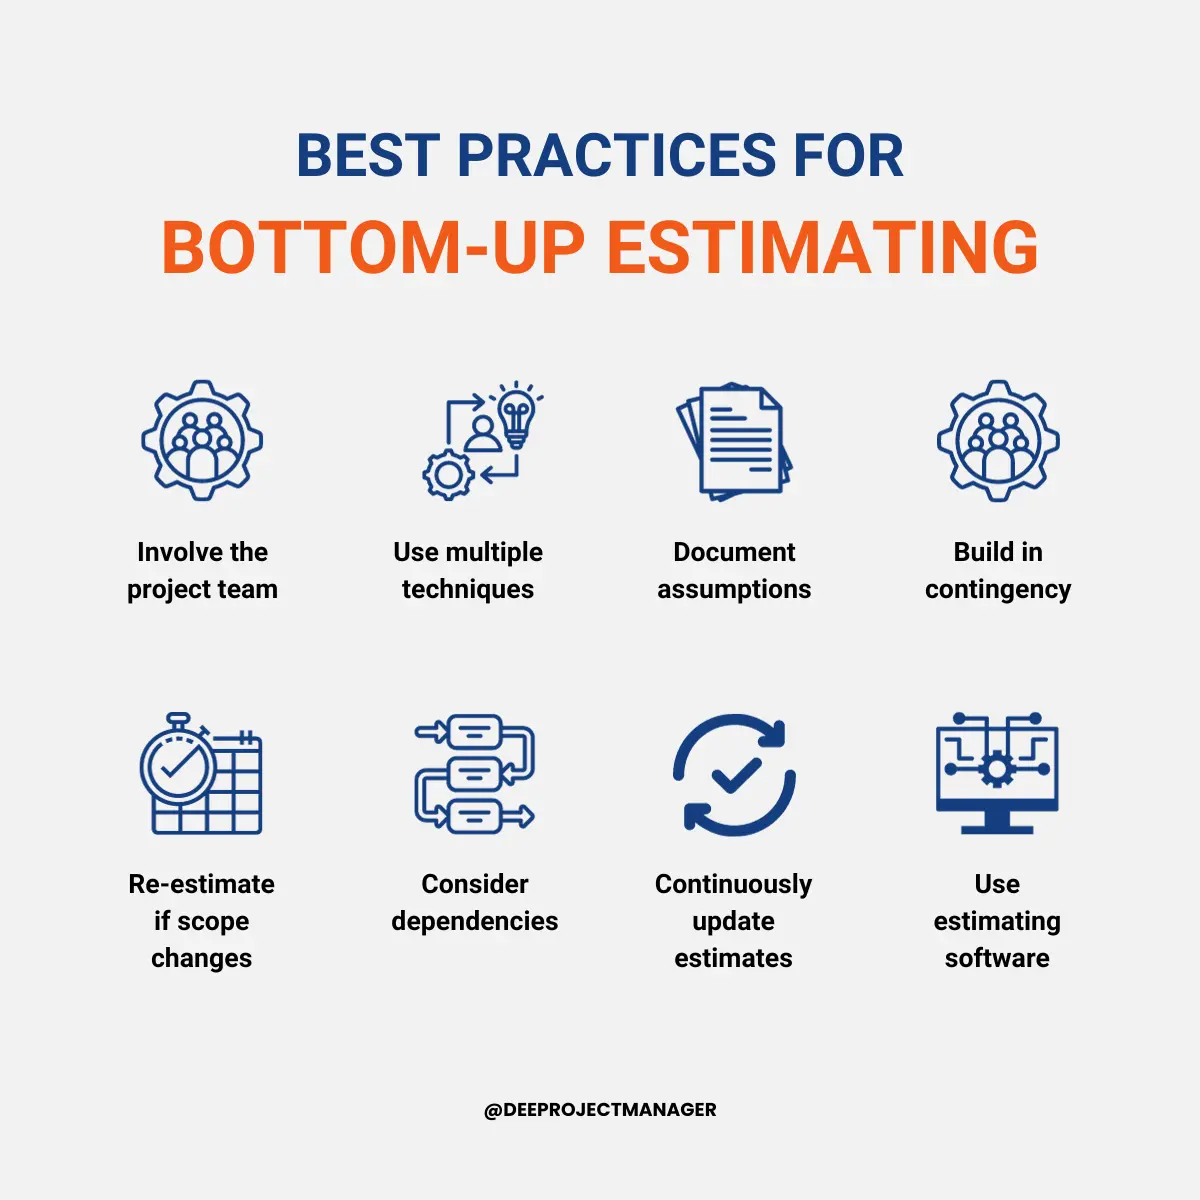 Best practices for bottom-up estimating